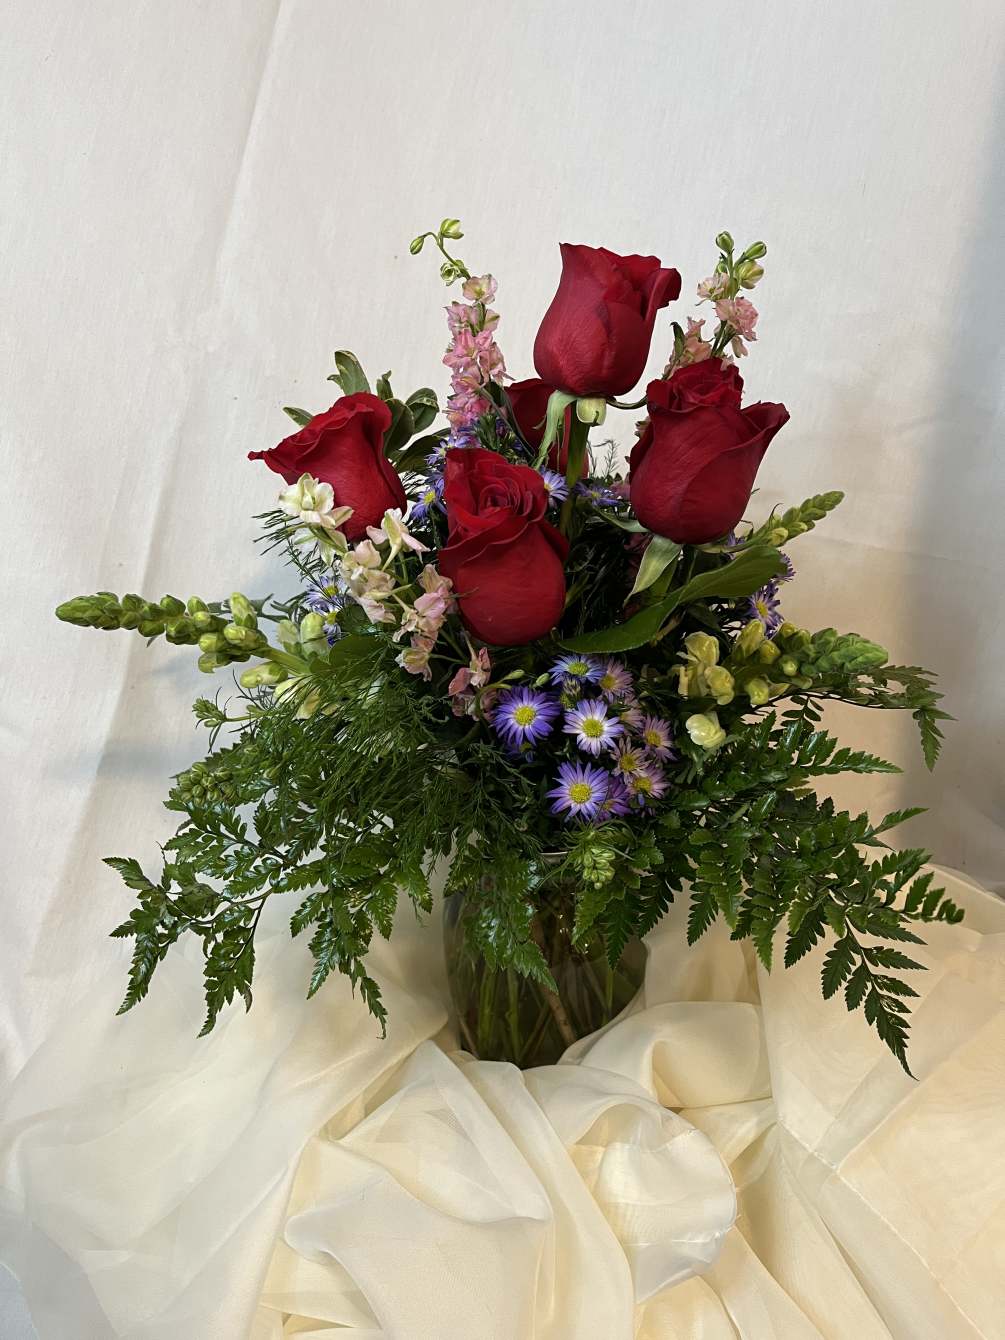 Lovely red roses, pink larkspur, white snapdragons, and purple status with luscious